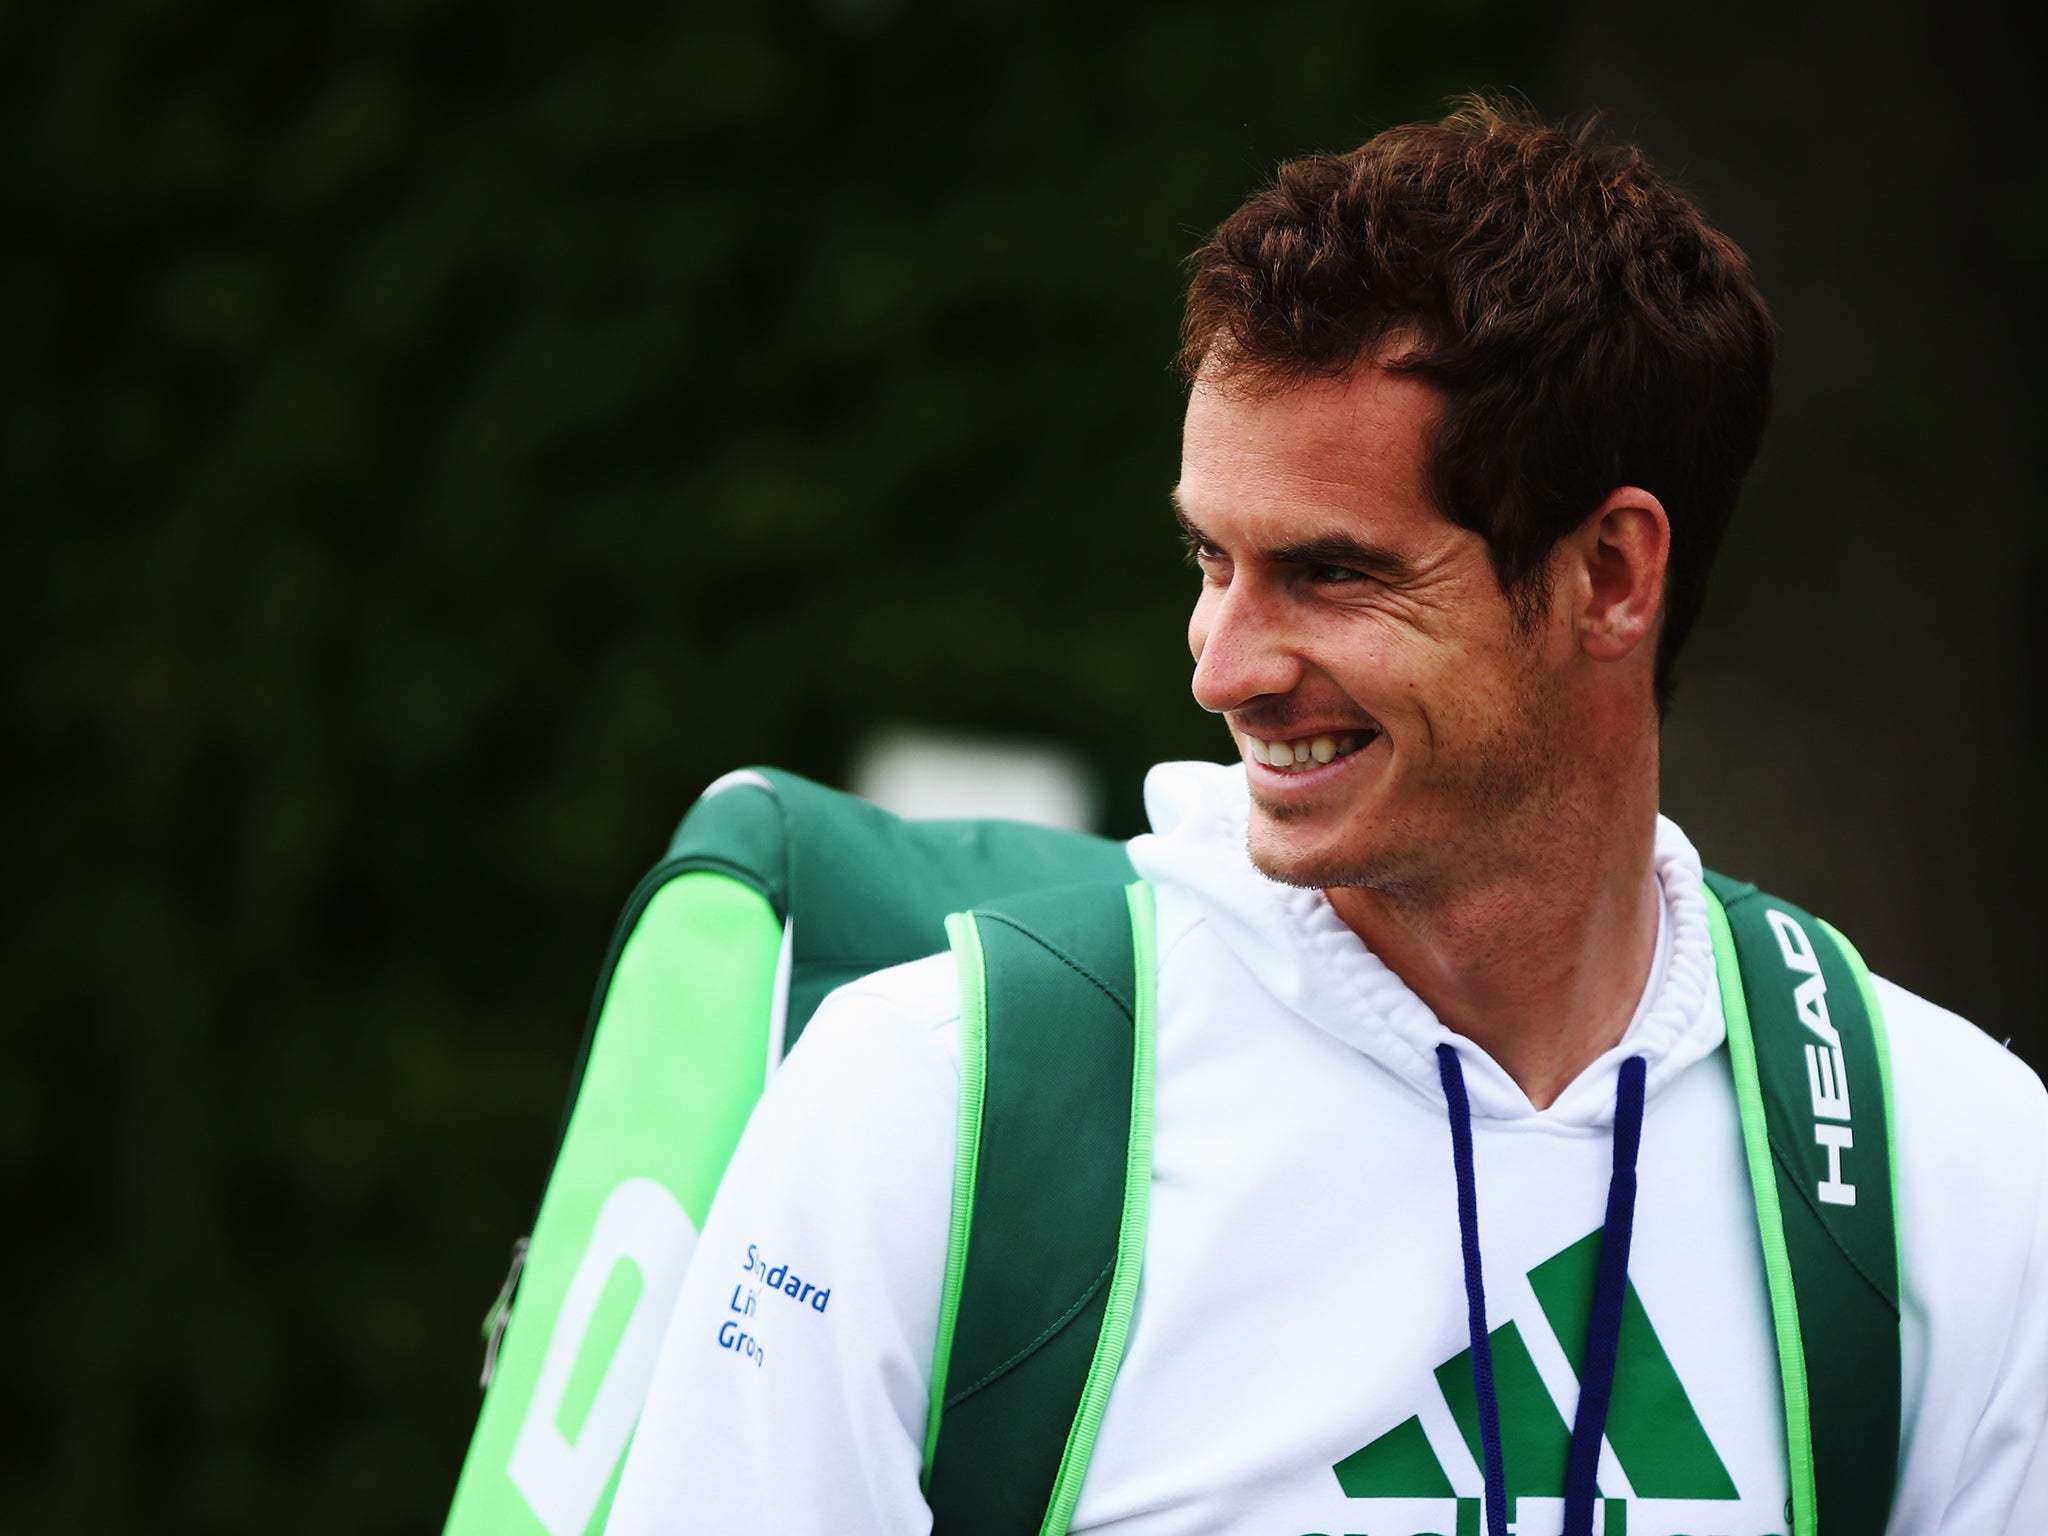 Andy Murray walks out to start a practice session on day four of the Wimbledon Lawn Tennis Championships